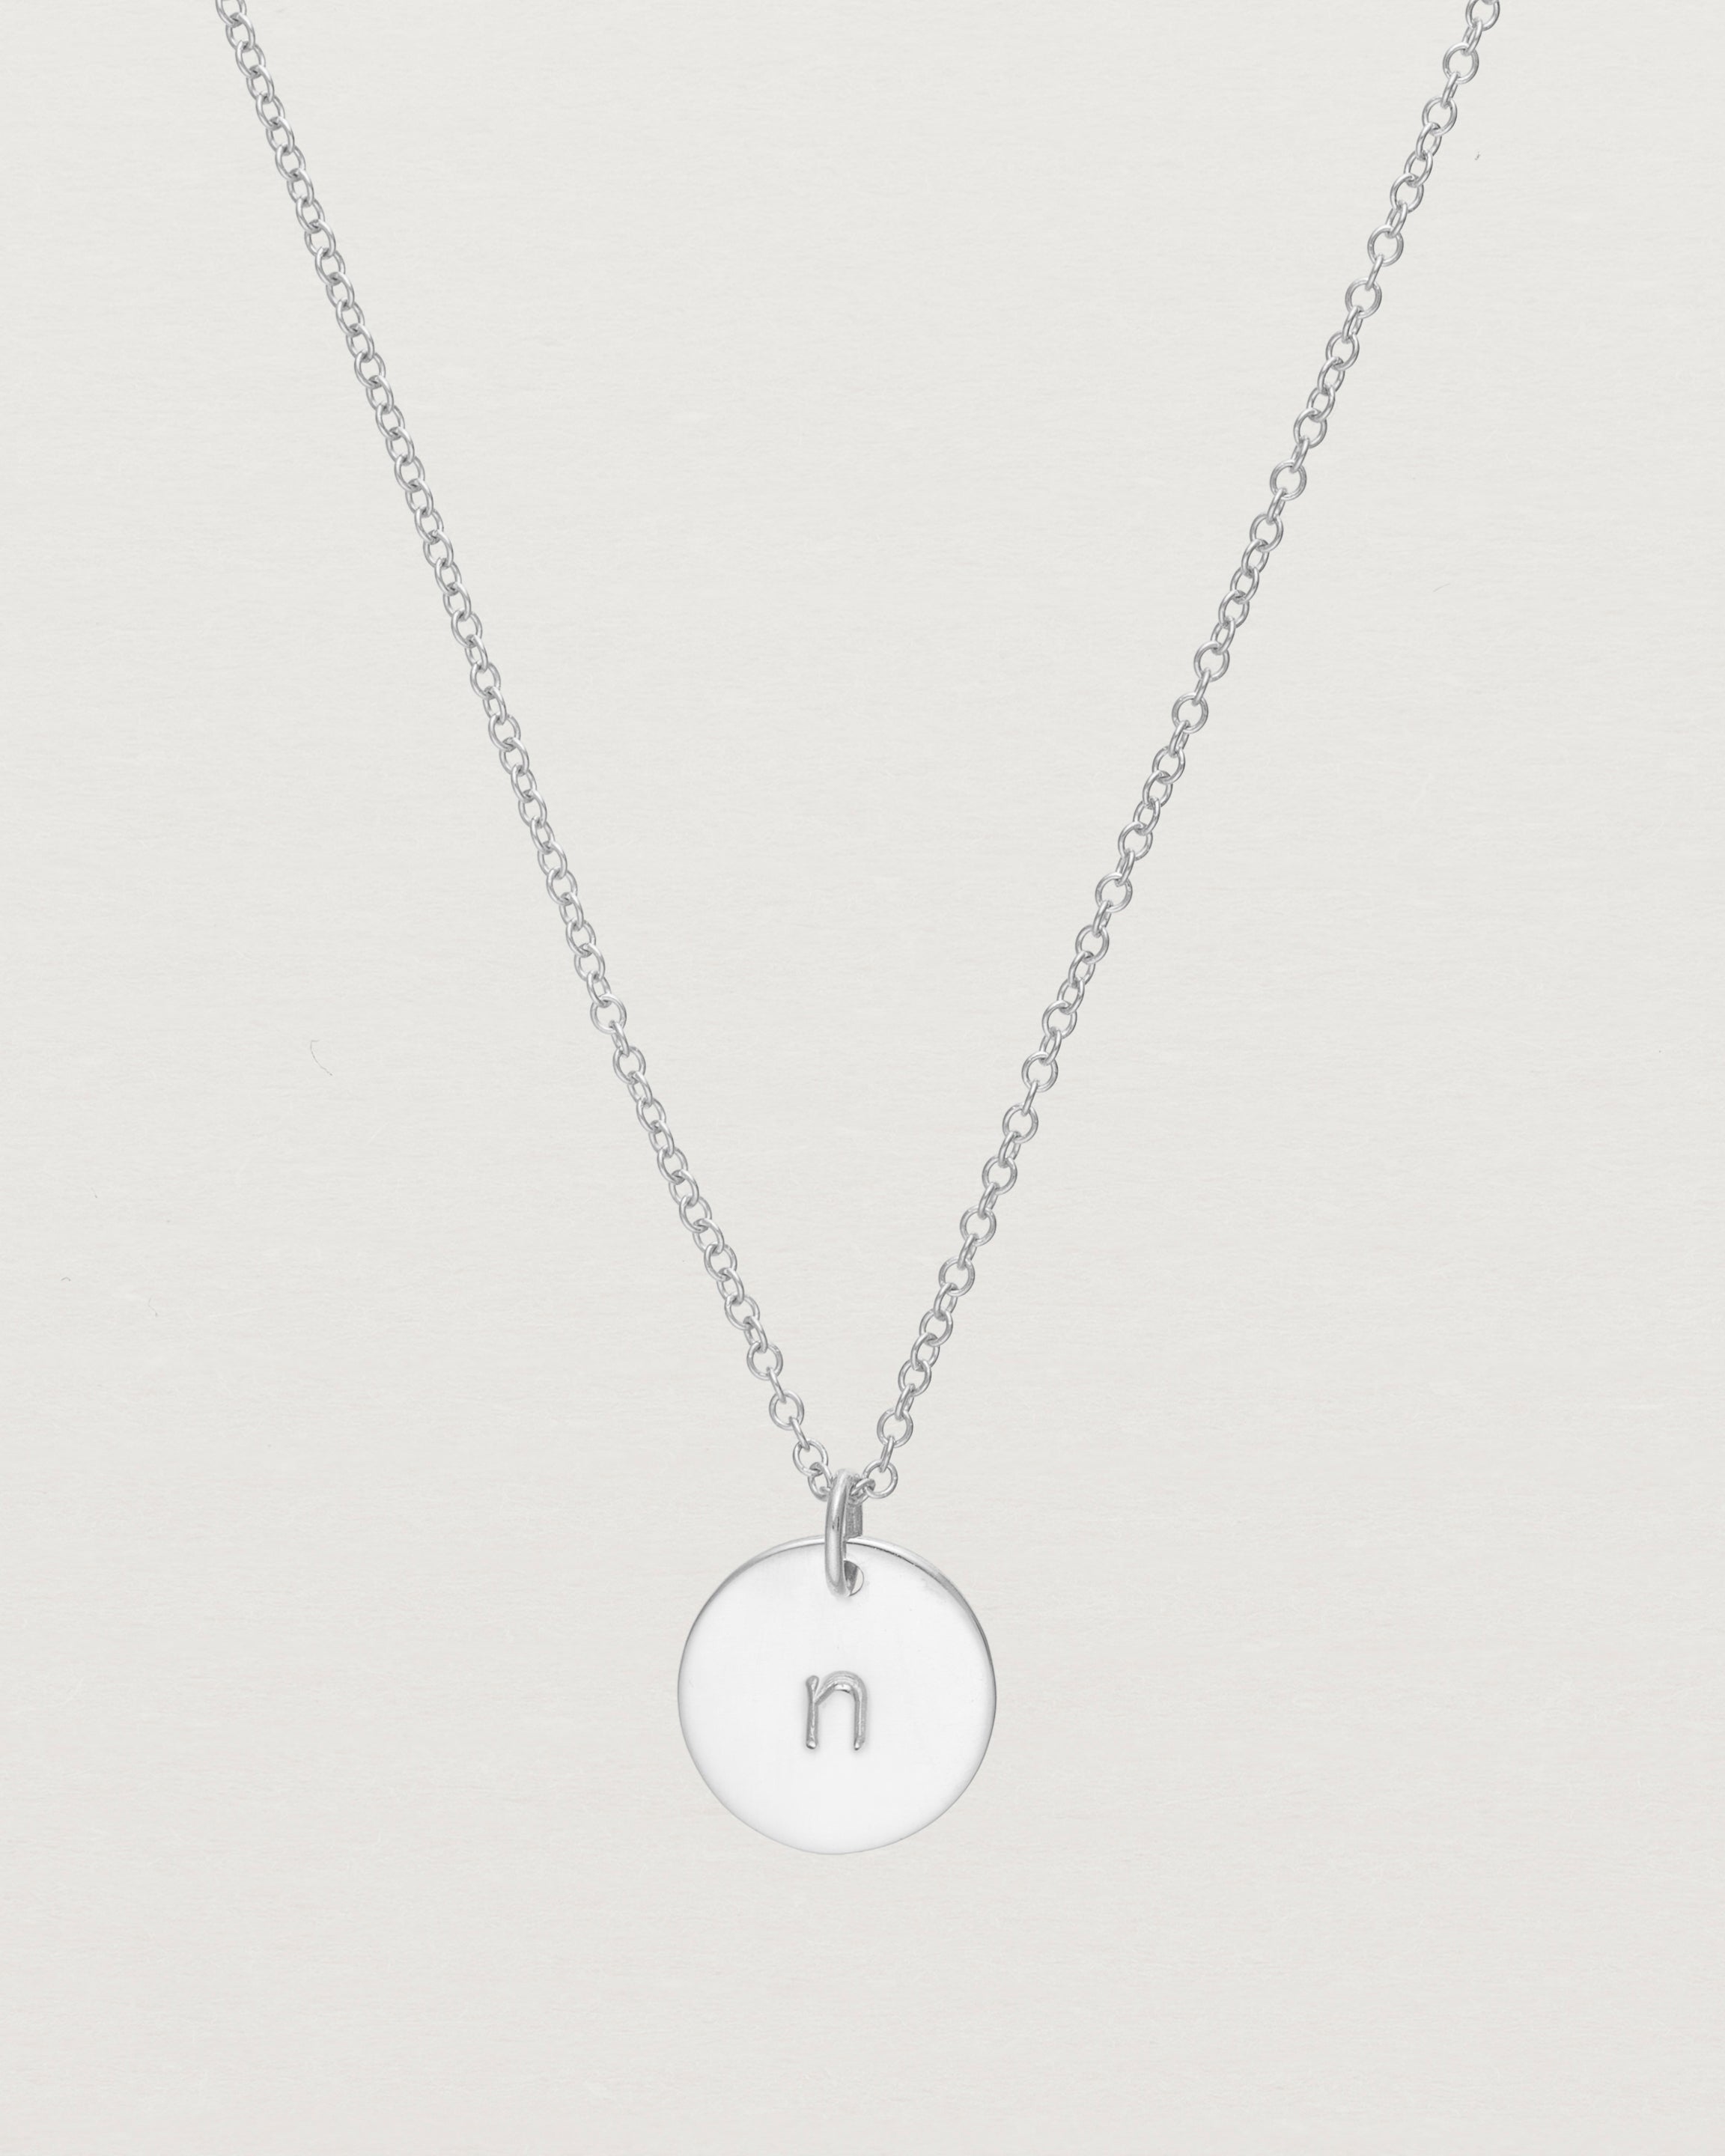 Dee Ruel Jewelry Medium Hand-Stamped Initial Necklace on Marmalade | The  Internet's Best Brands